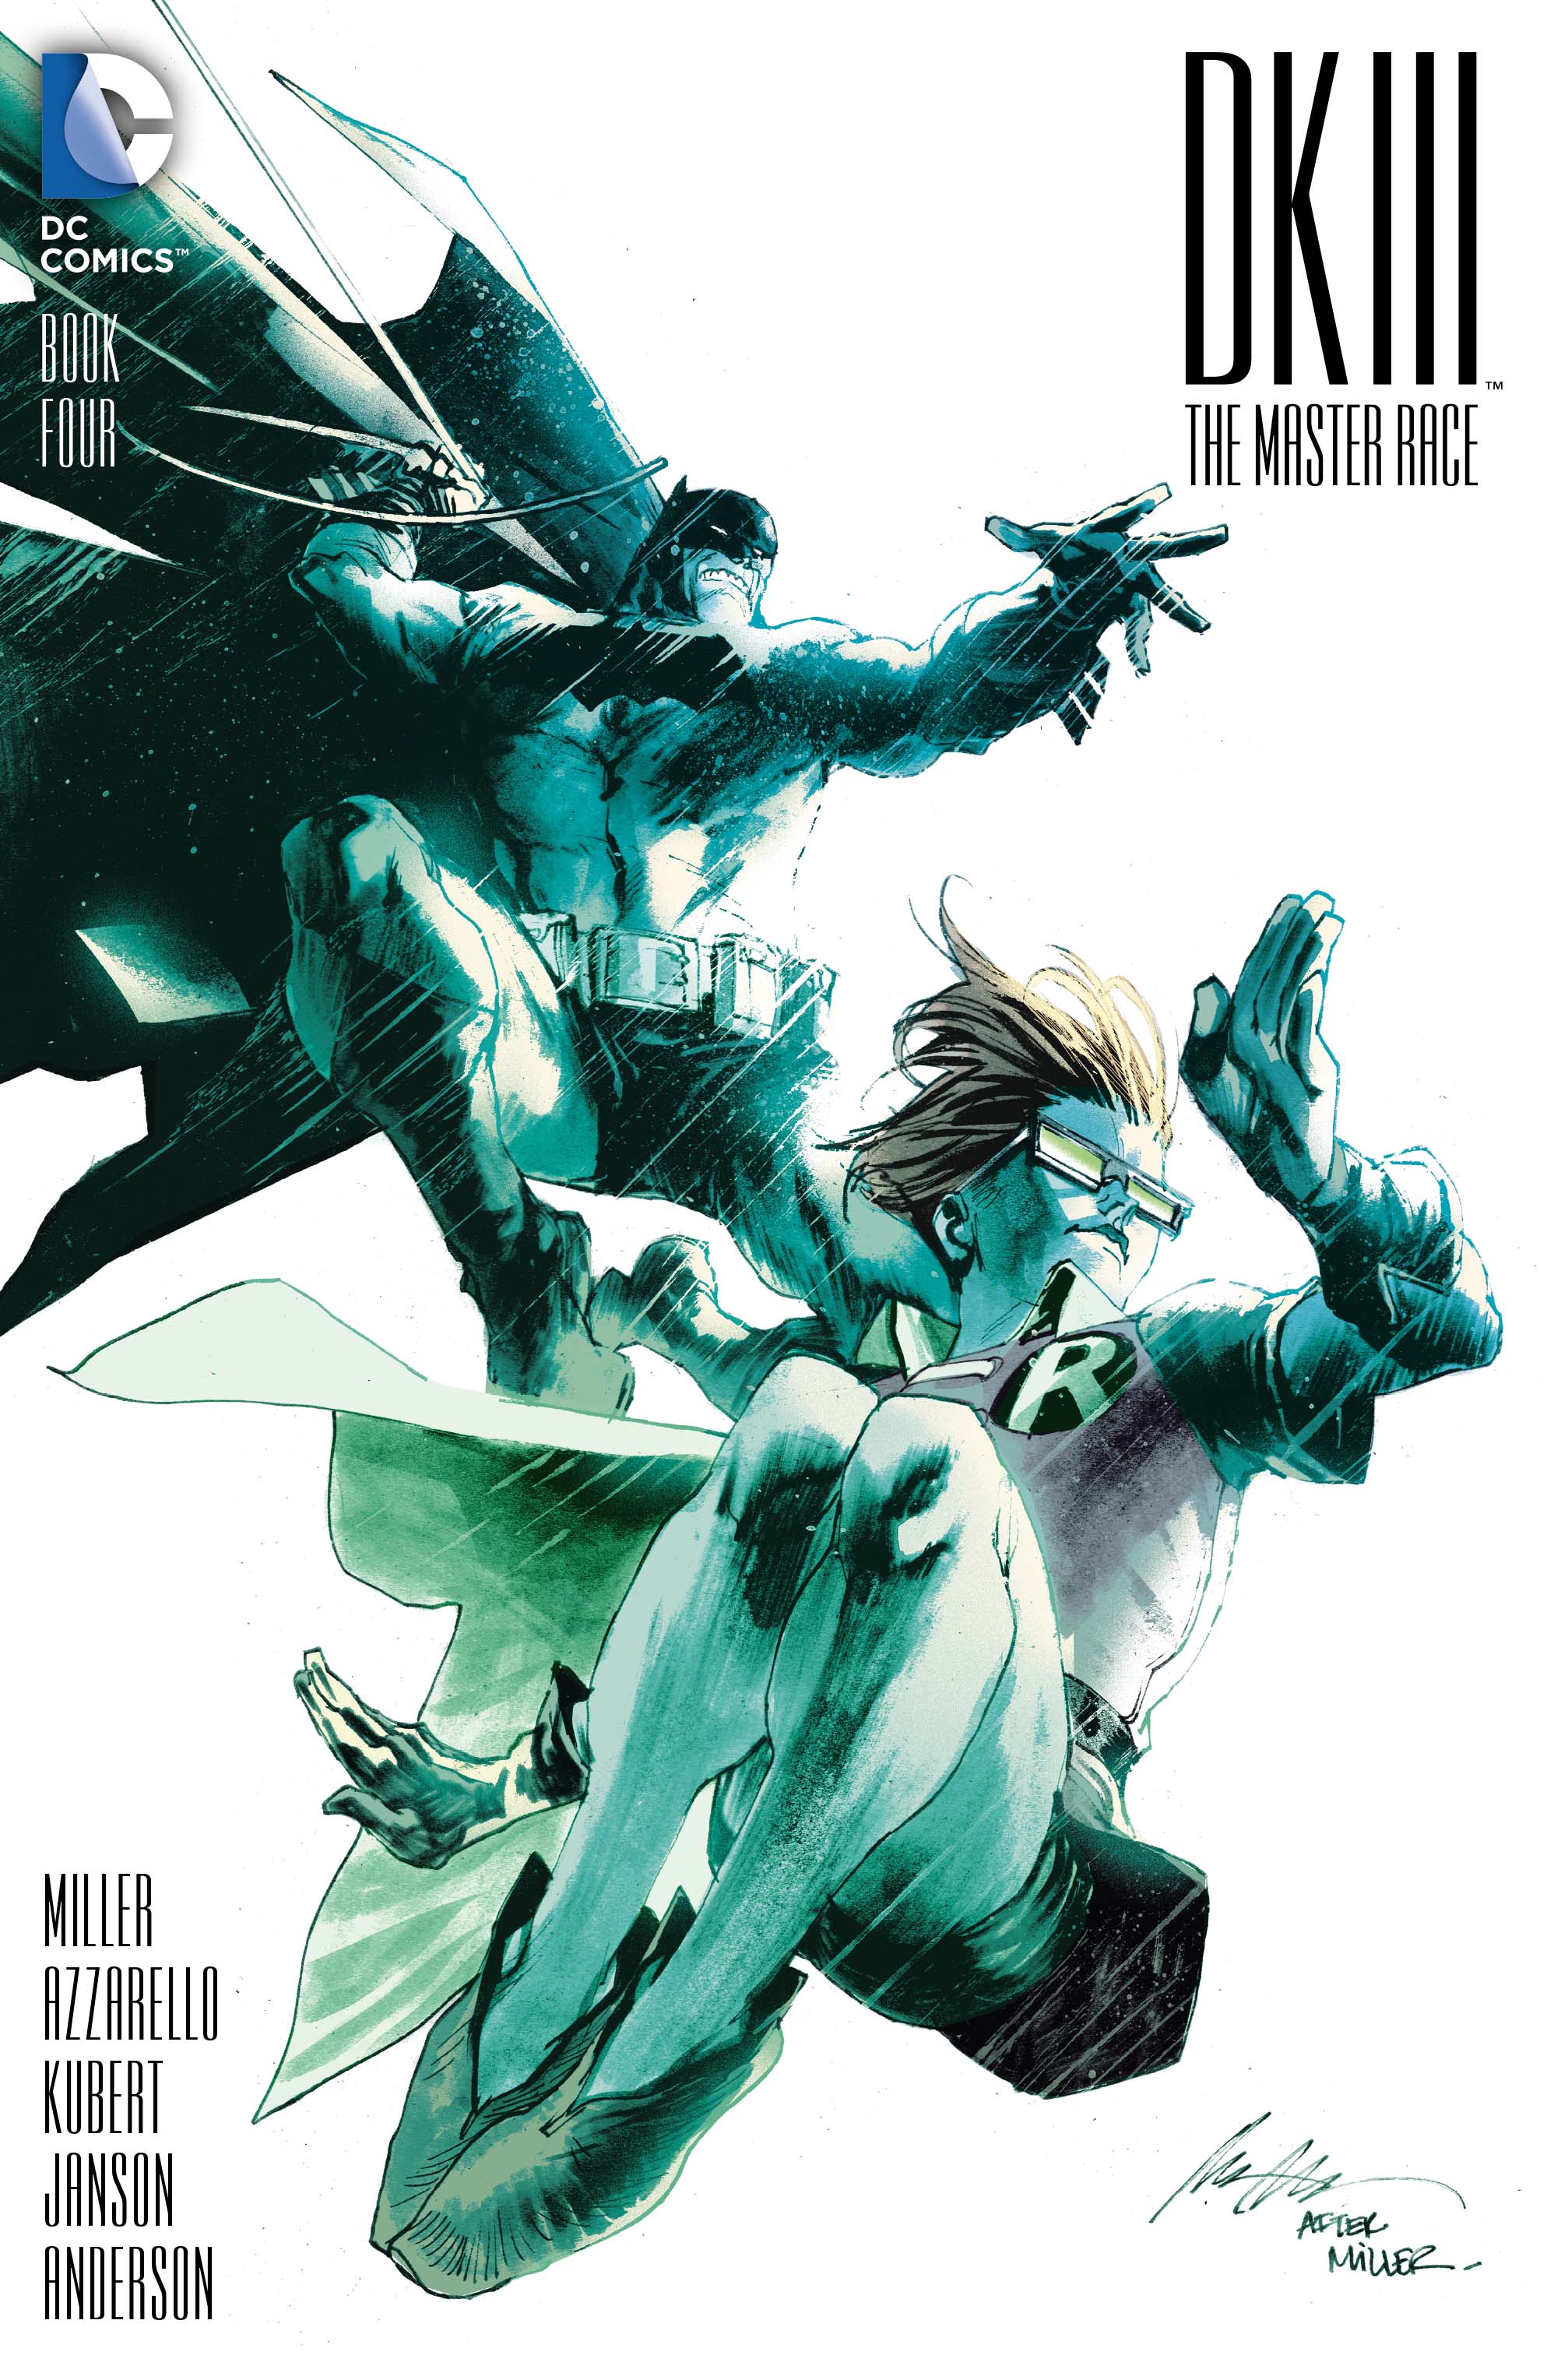 Comic Book Review: Dark Knight III: The Master Race #4 - Bounding Into  Comics